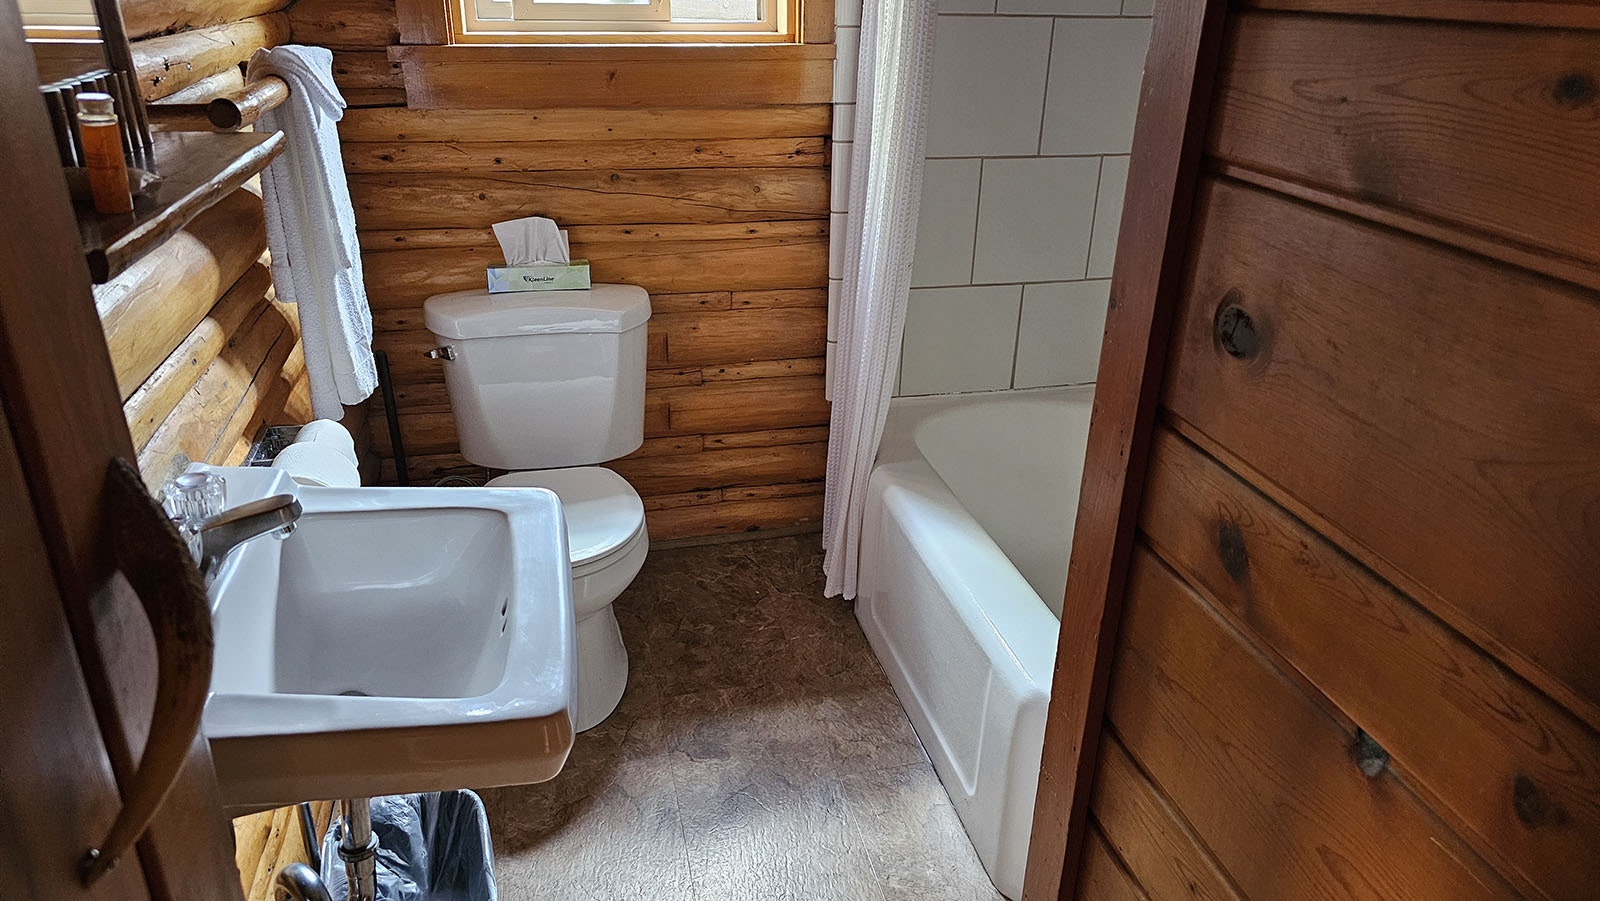 The bathrooms are small, but some include tubs as well as a sink and toilet.